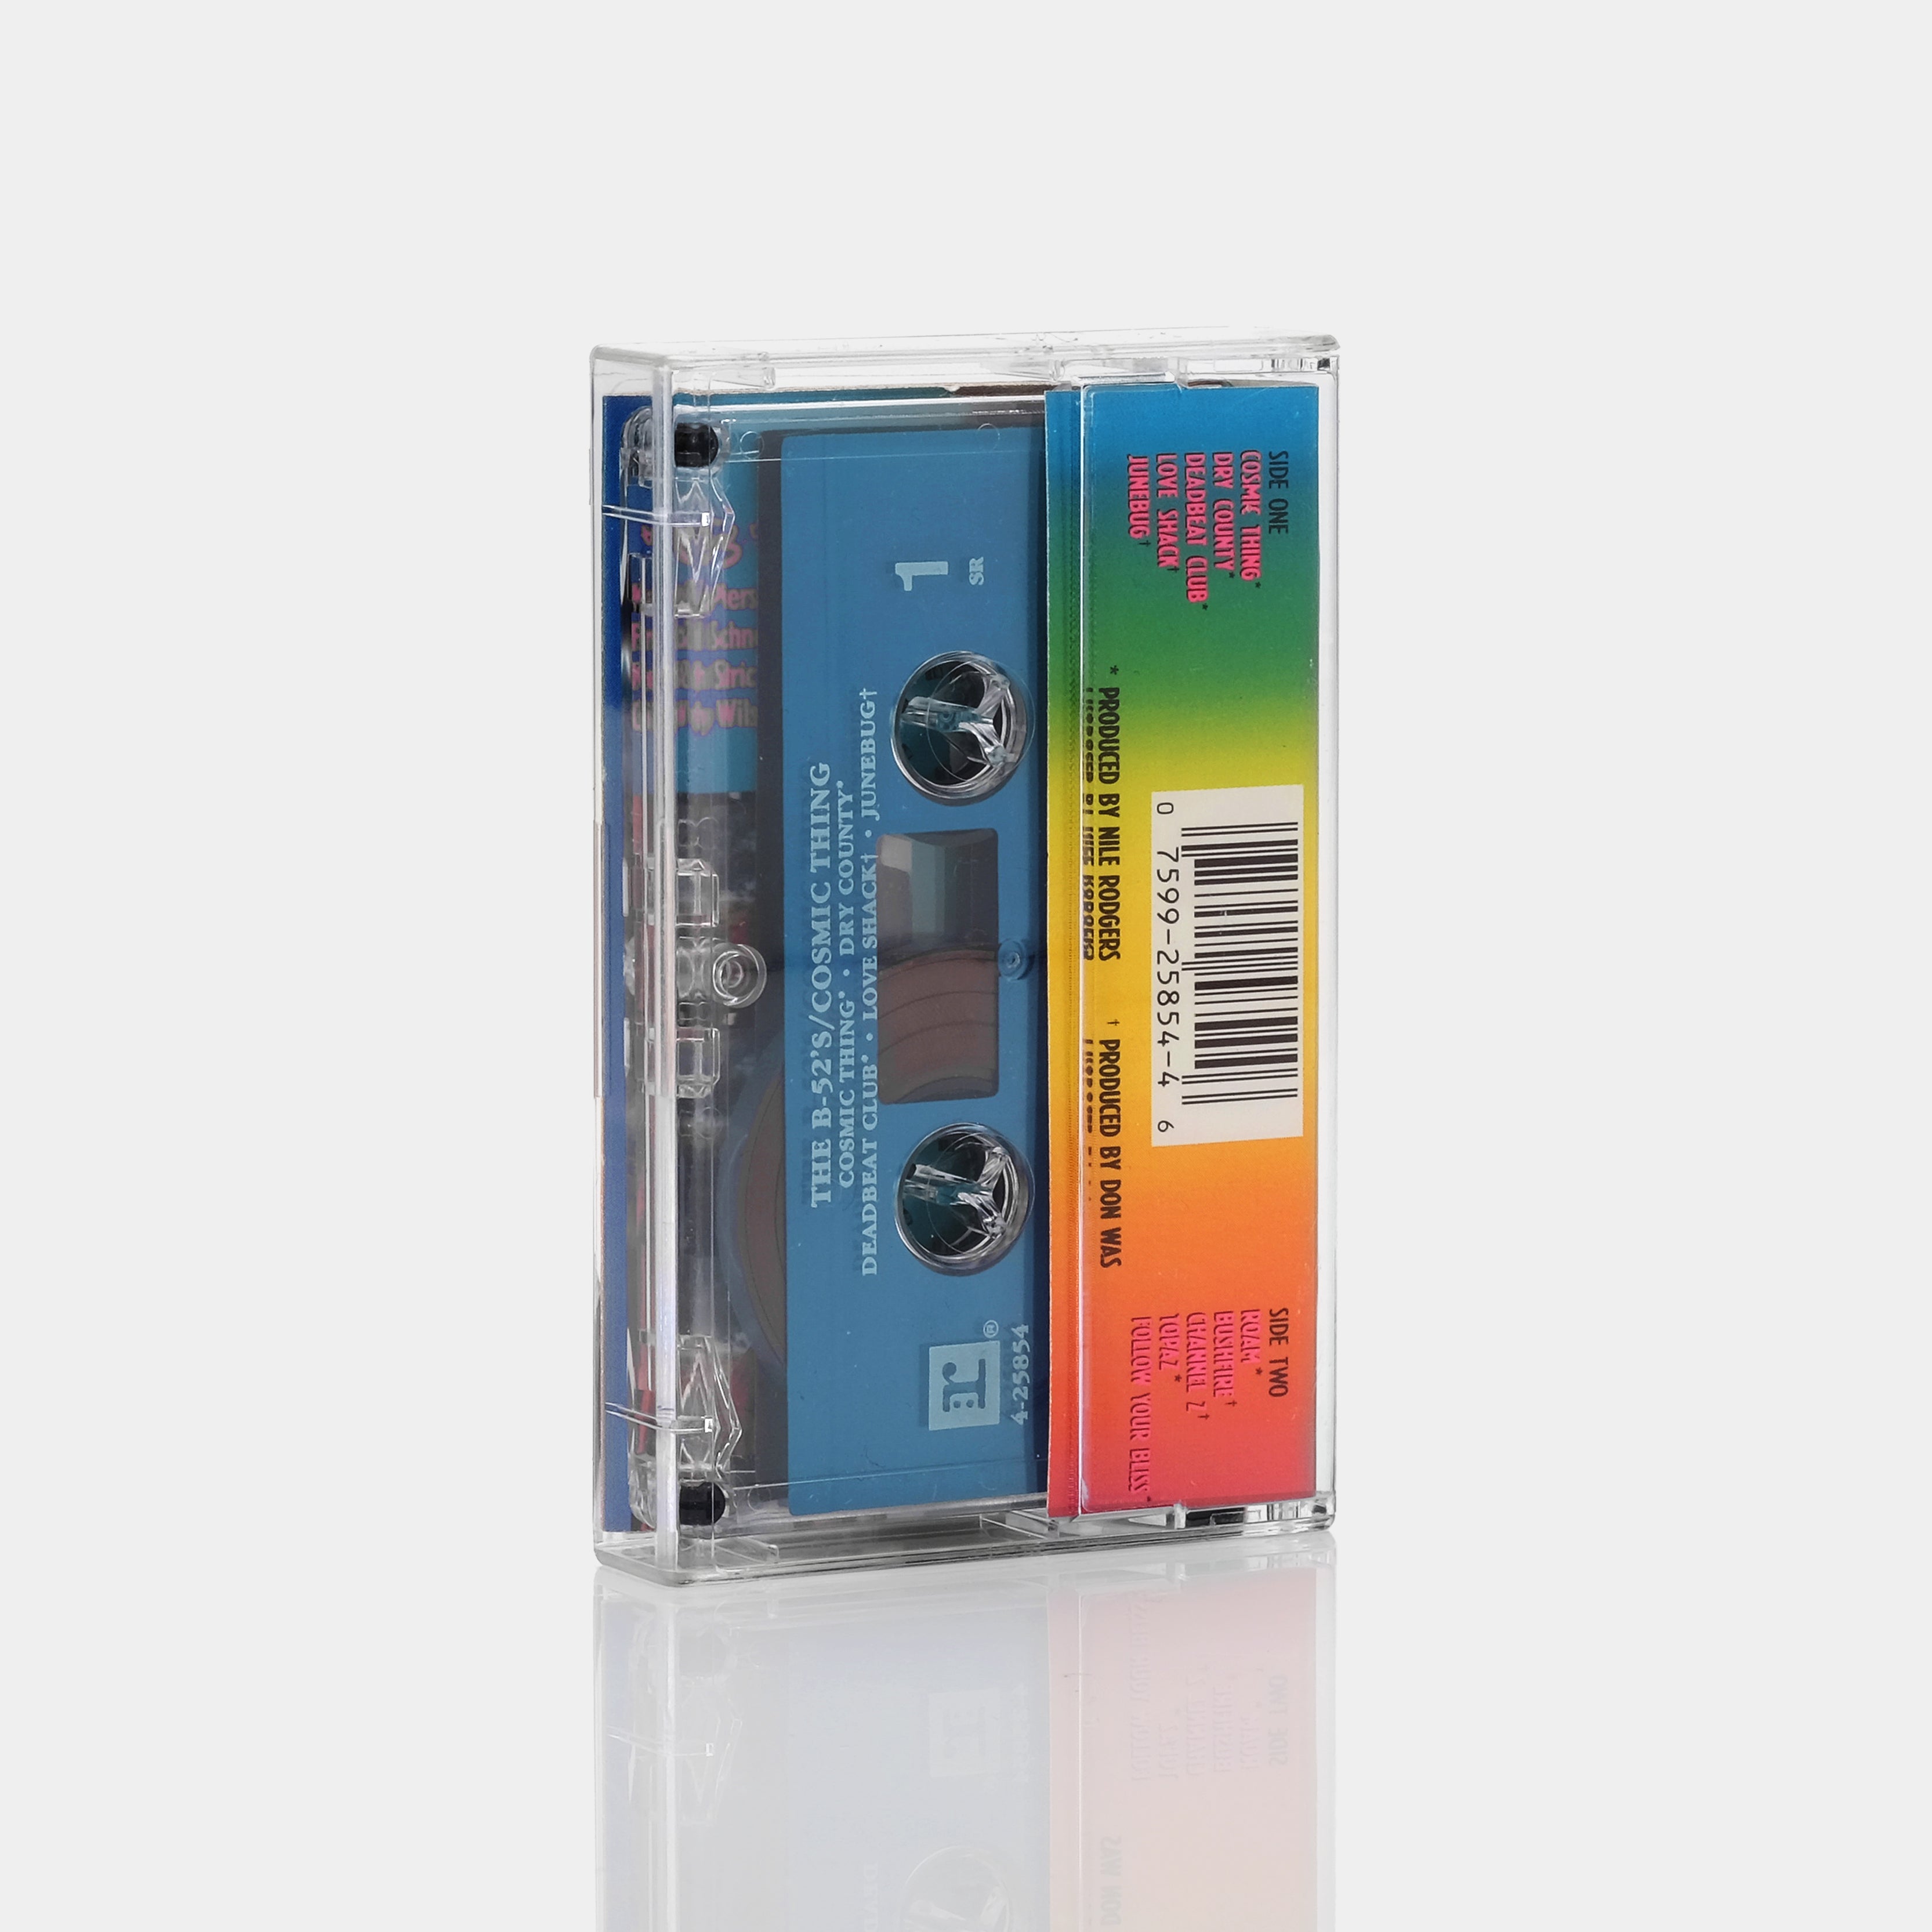 The B-52's - Cosmic Thing Cassette Tape